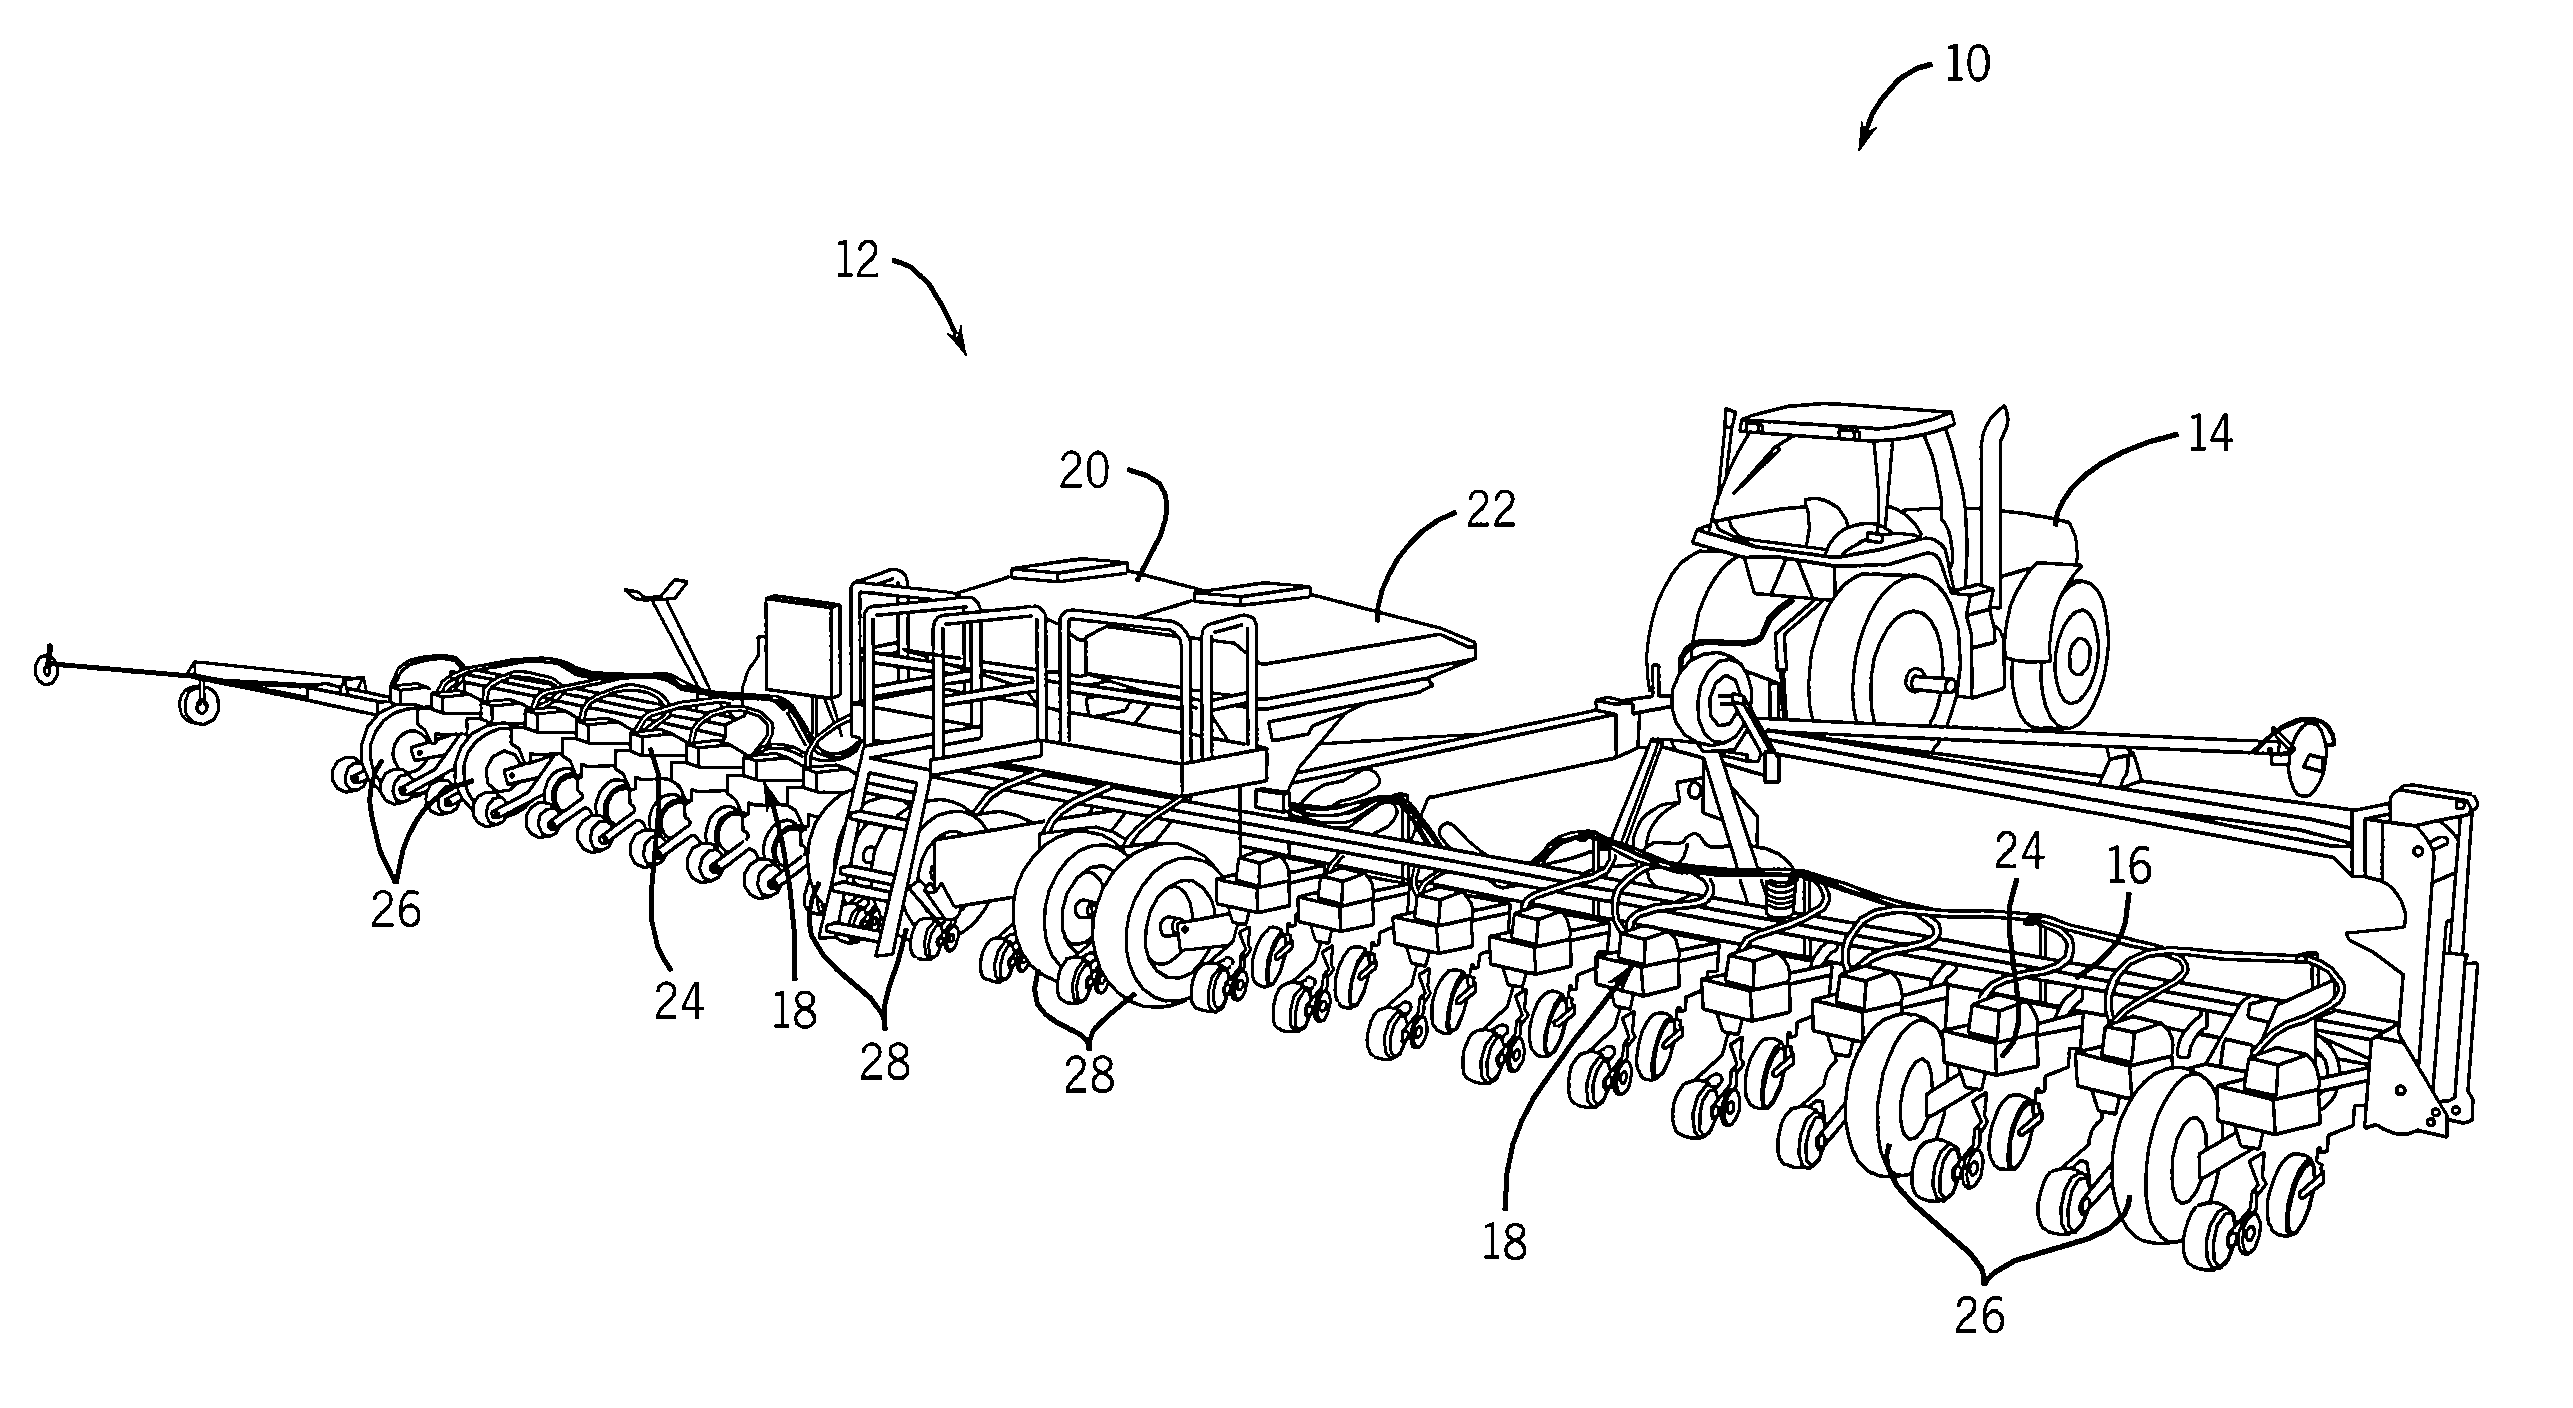 Auto-steerable farming system